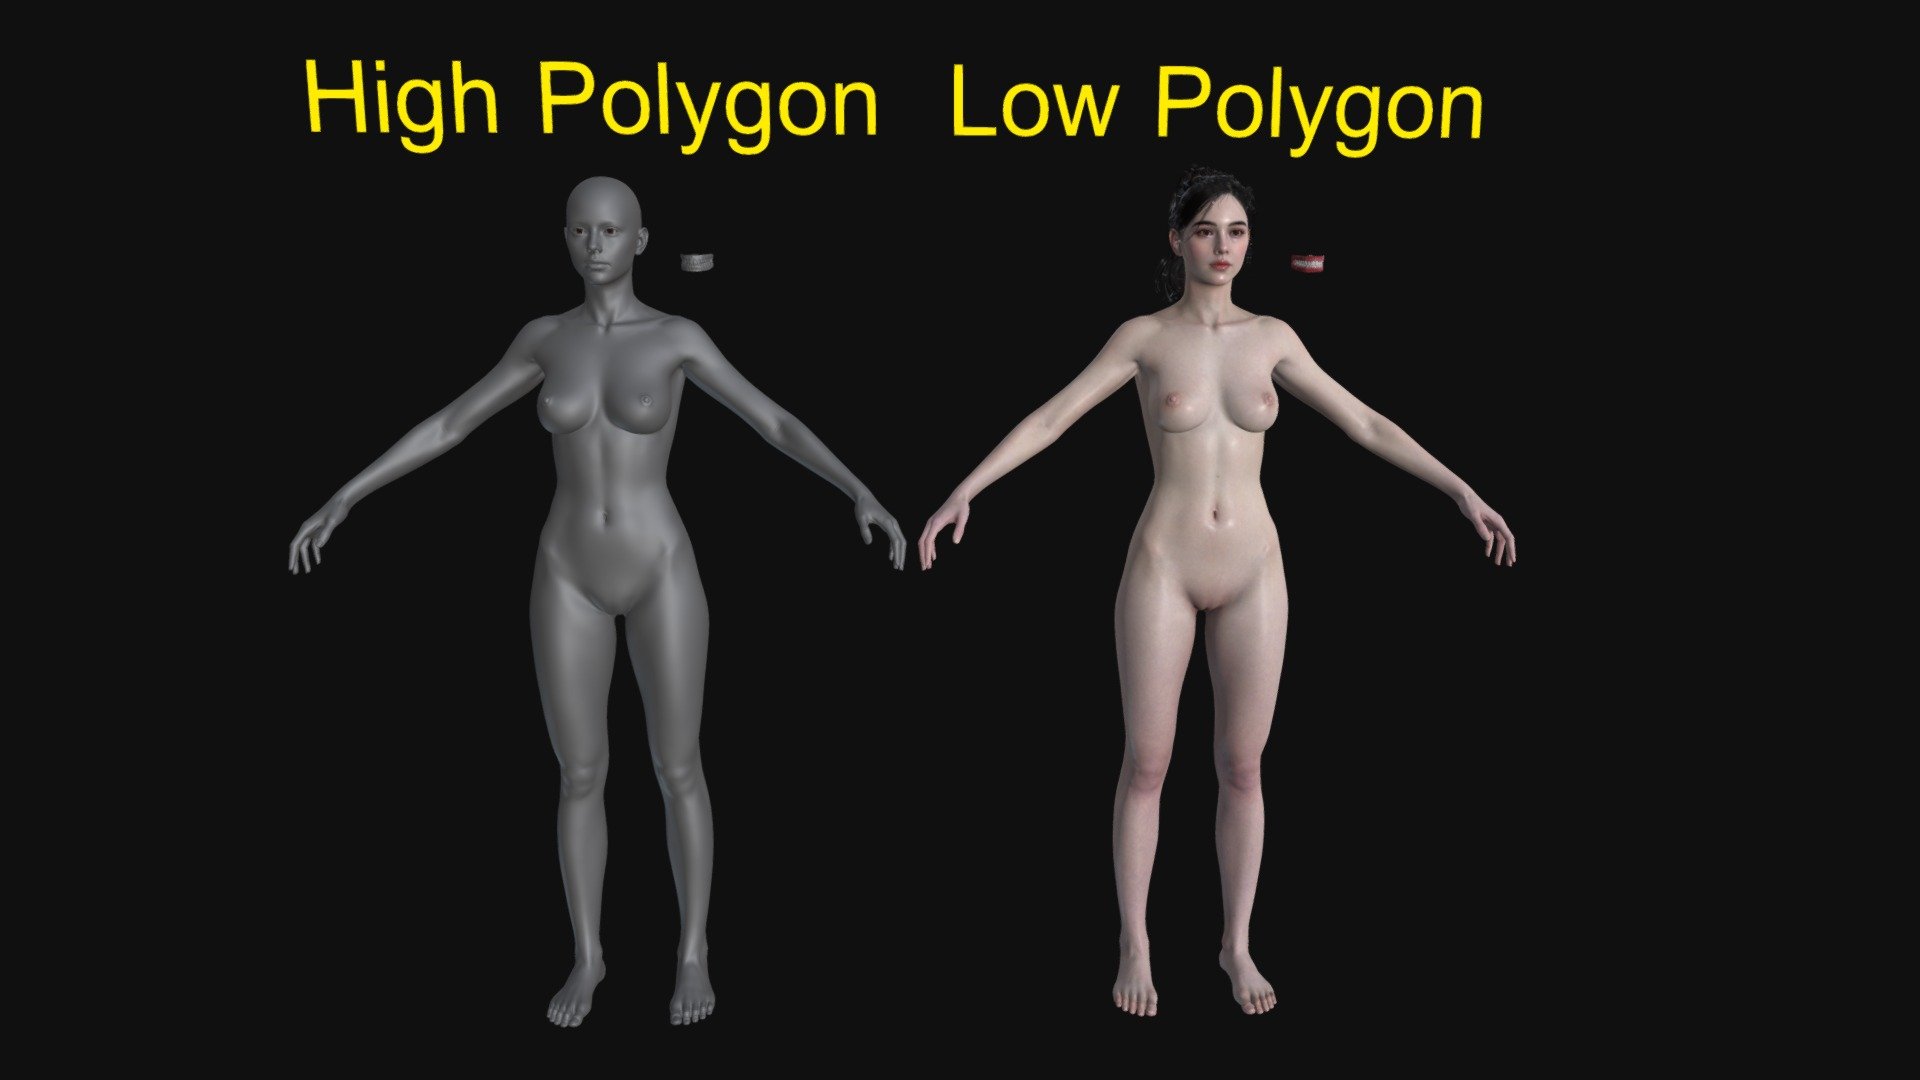 Features :

-Realistic body proportions and anatomy

-Good proportions

-Low polygon attachment for immediate rigging

-Perfectly matched  highPoly and LowPoly attachments(Render to texture possible right away)

-Oral structure attached to enable facial animation

-High-quality 4K textures used for low-polygons are attached.

-Detailed and realistic hand structure considering first-person view

Contents :

-HighPolygon model  Zbrush(2018) : 2342016Polygons, 4 Level Subdivision

-HighPolygon model OBJ : Body, Nail, Teeth, Tongue

-LowPolygon model 3DMax(2019) 

-LowPolygon model OBJ, FBX

-Textures : Albedo, Gloss/Specolor, Normal

-Material : Face, Body, Eye, Mouth, Hair, brow - Female Base Body - Buy Royalty Free 3D model by looky0213 3d model